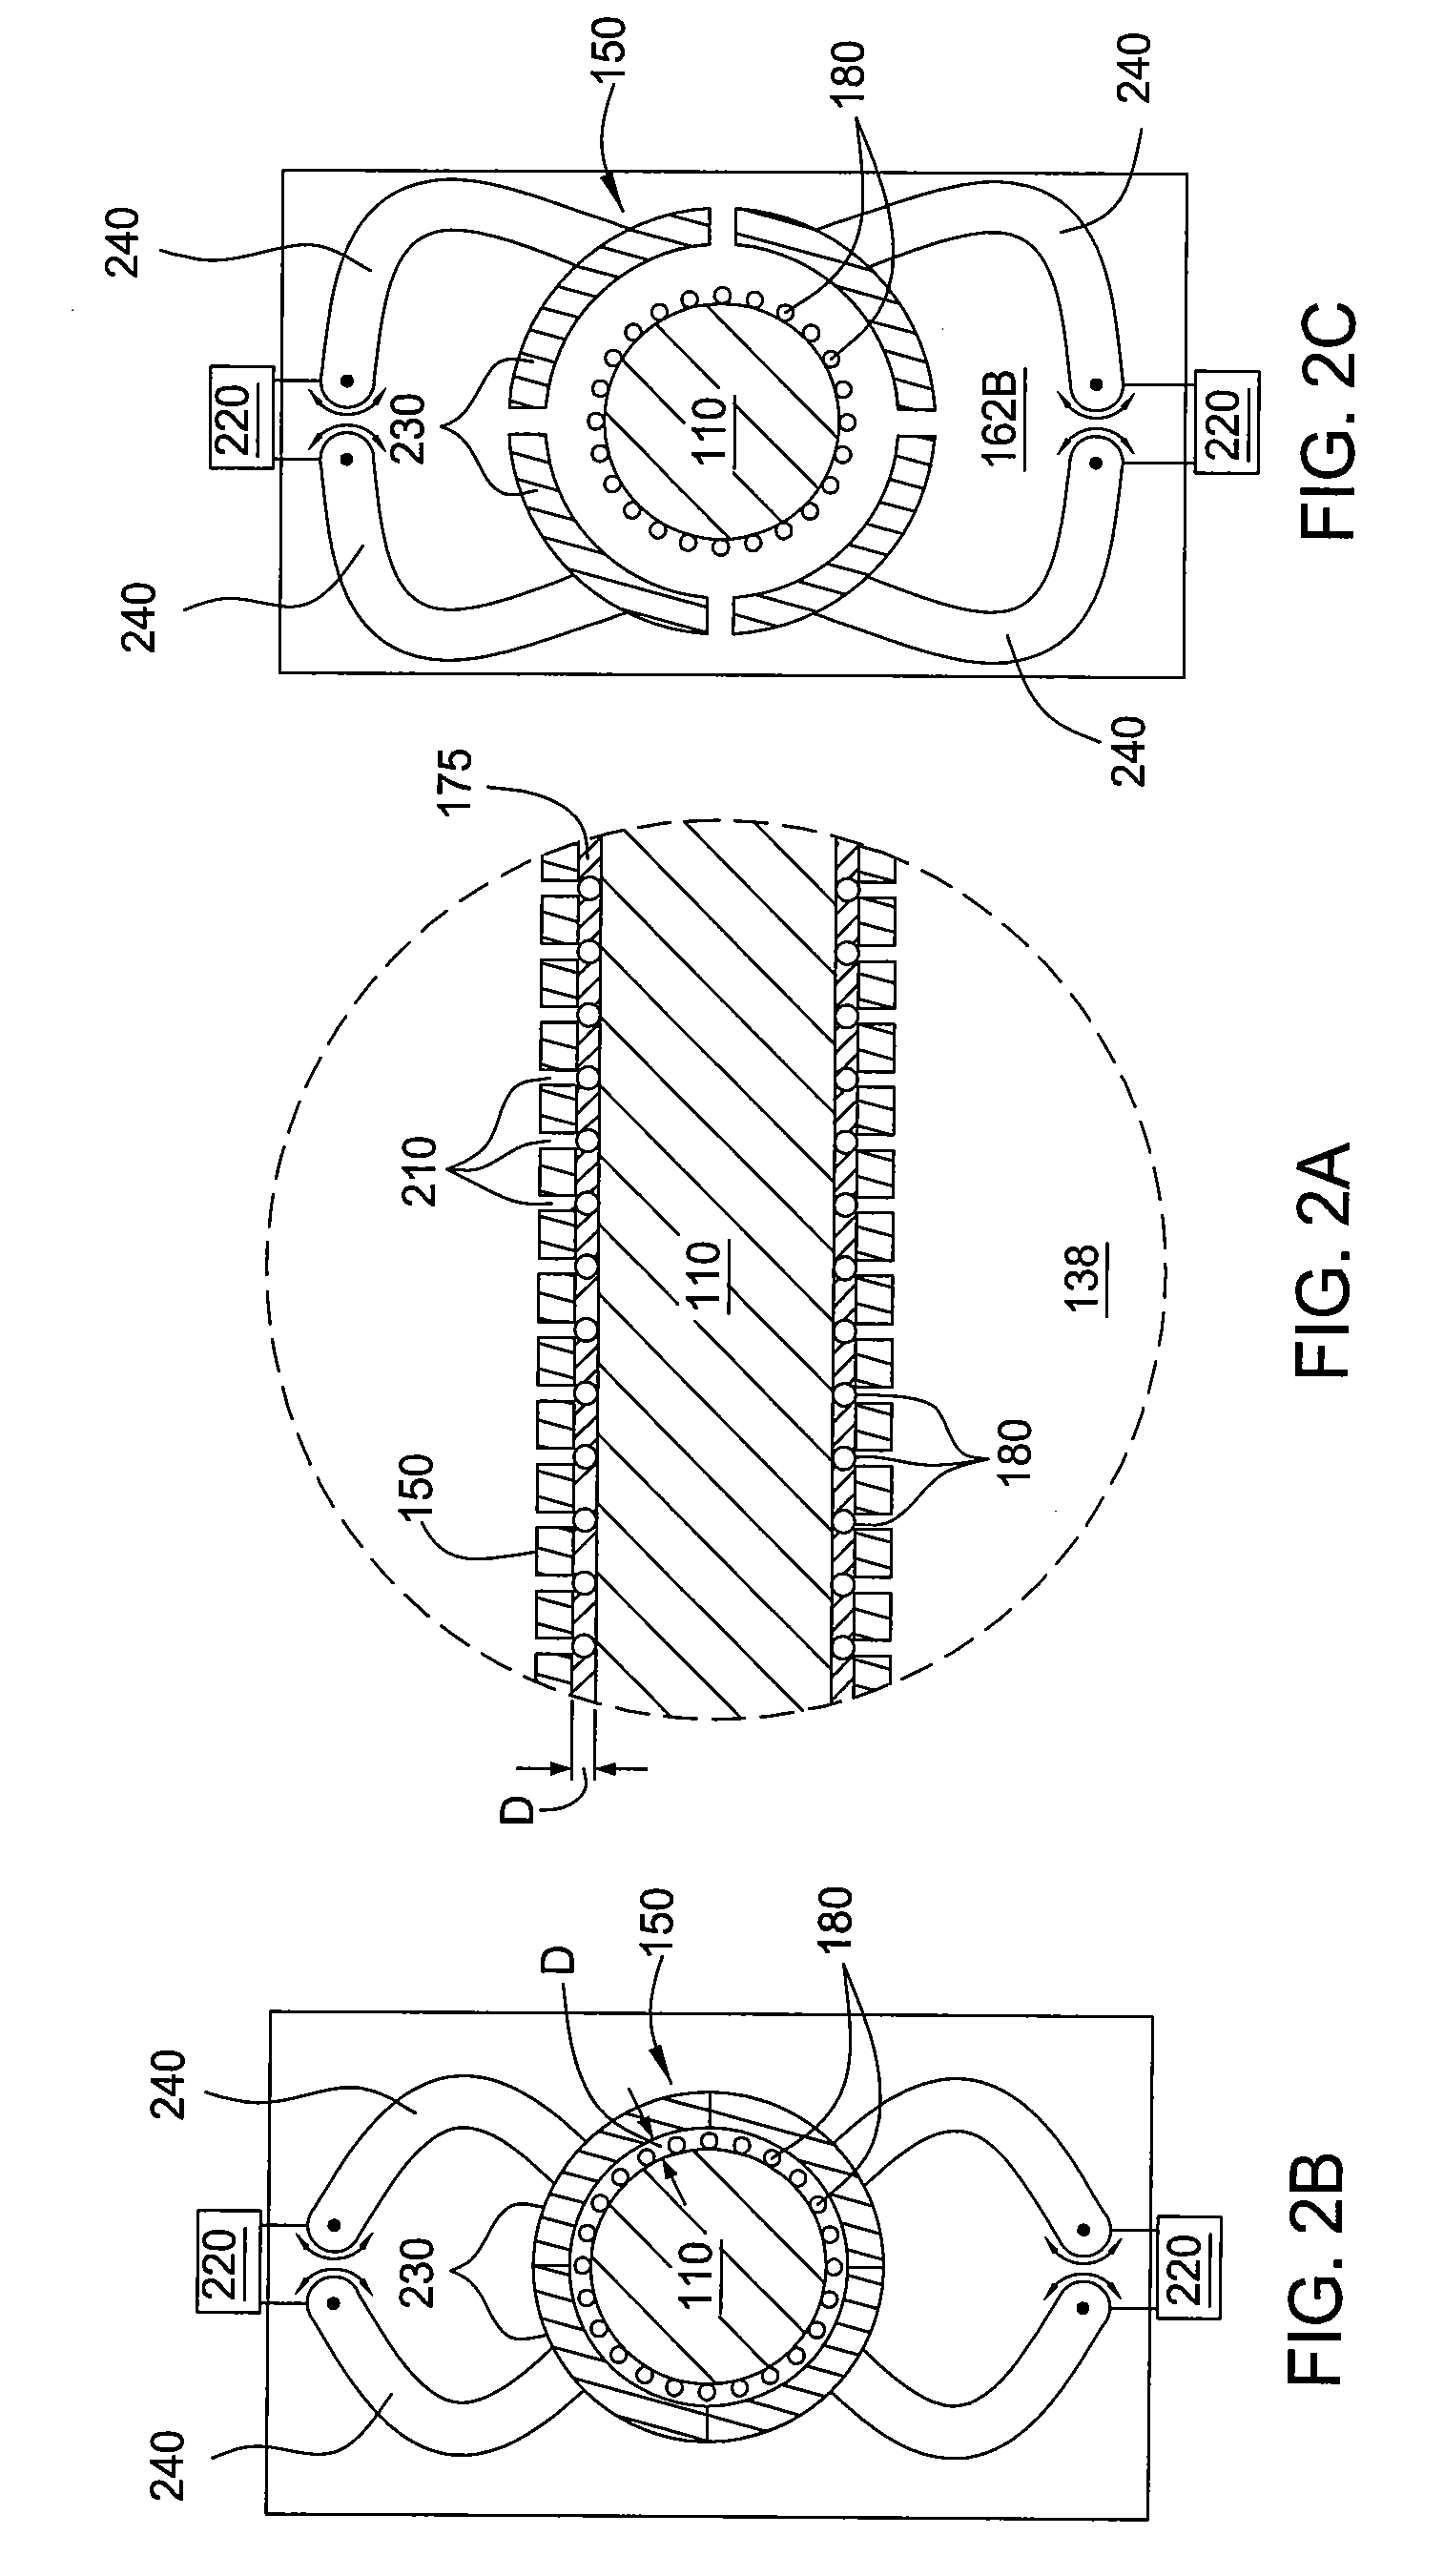 Method and apparatus for manufacturing an abrasive wire